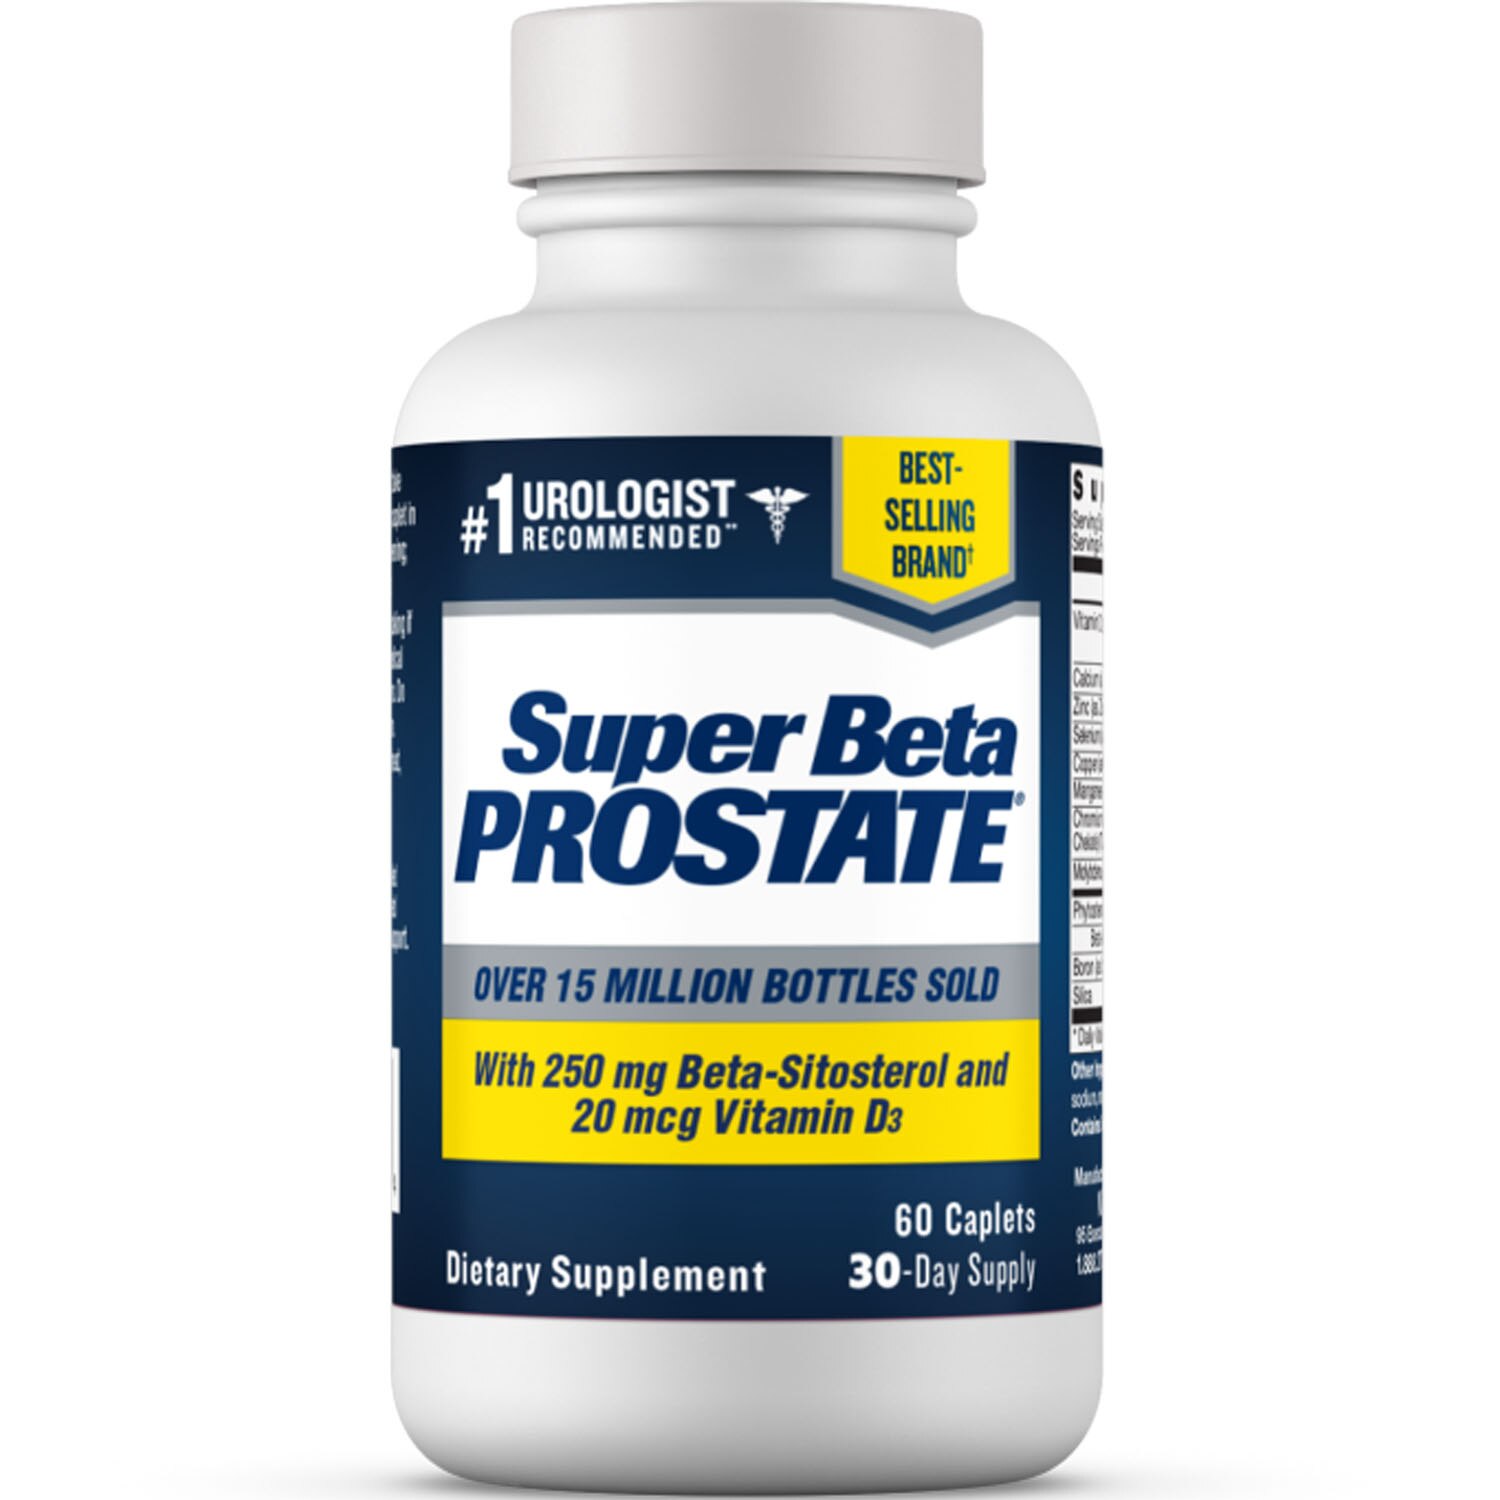 Super Beta Prostate by New Vitality with Beta-Sitosterol & Vitamin D, 60 CT